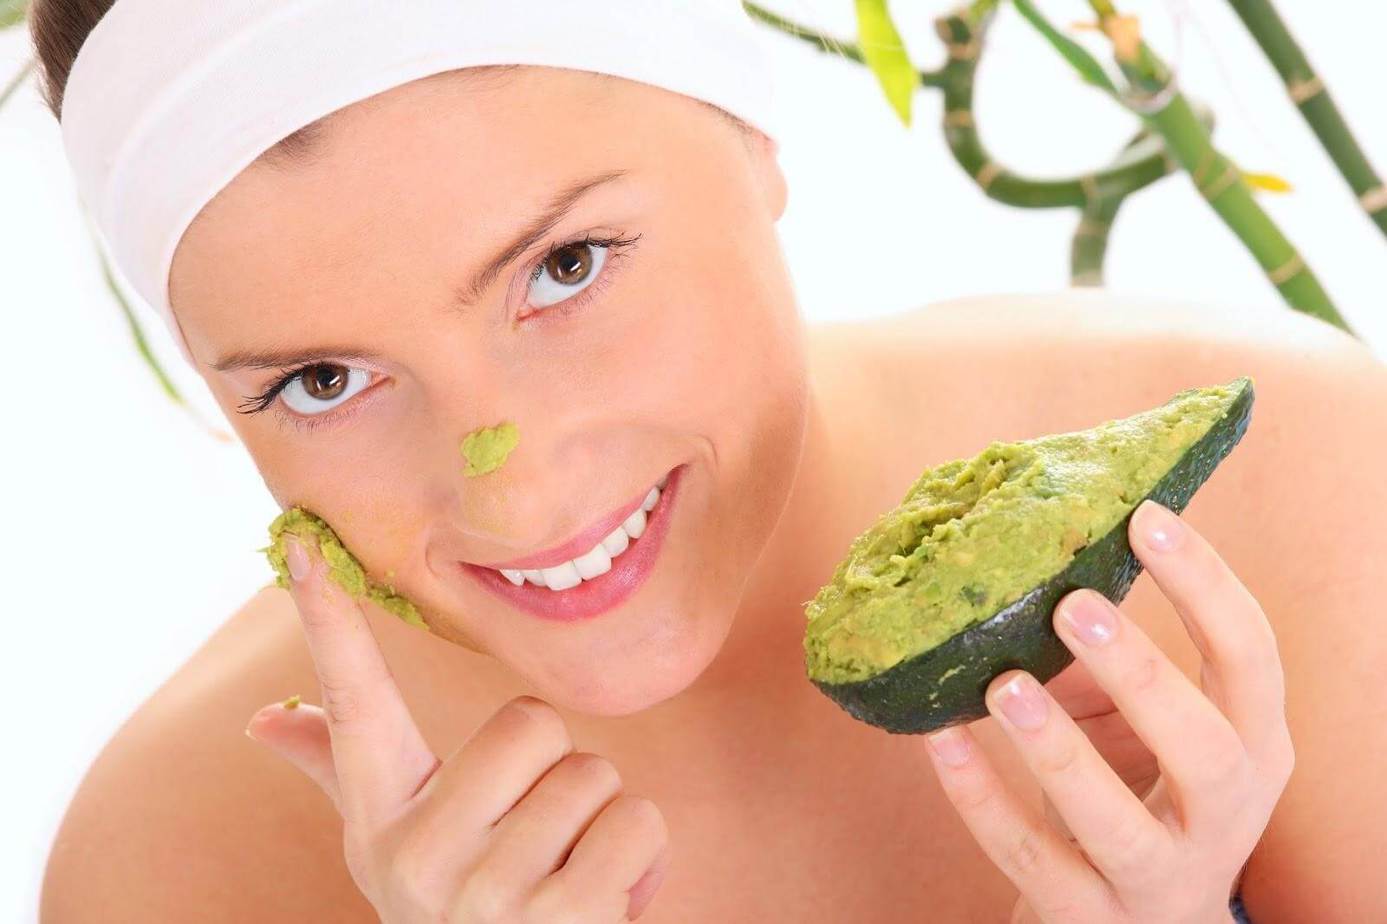 Is Regular Avocado Mask Good For You? Security